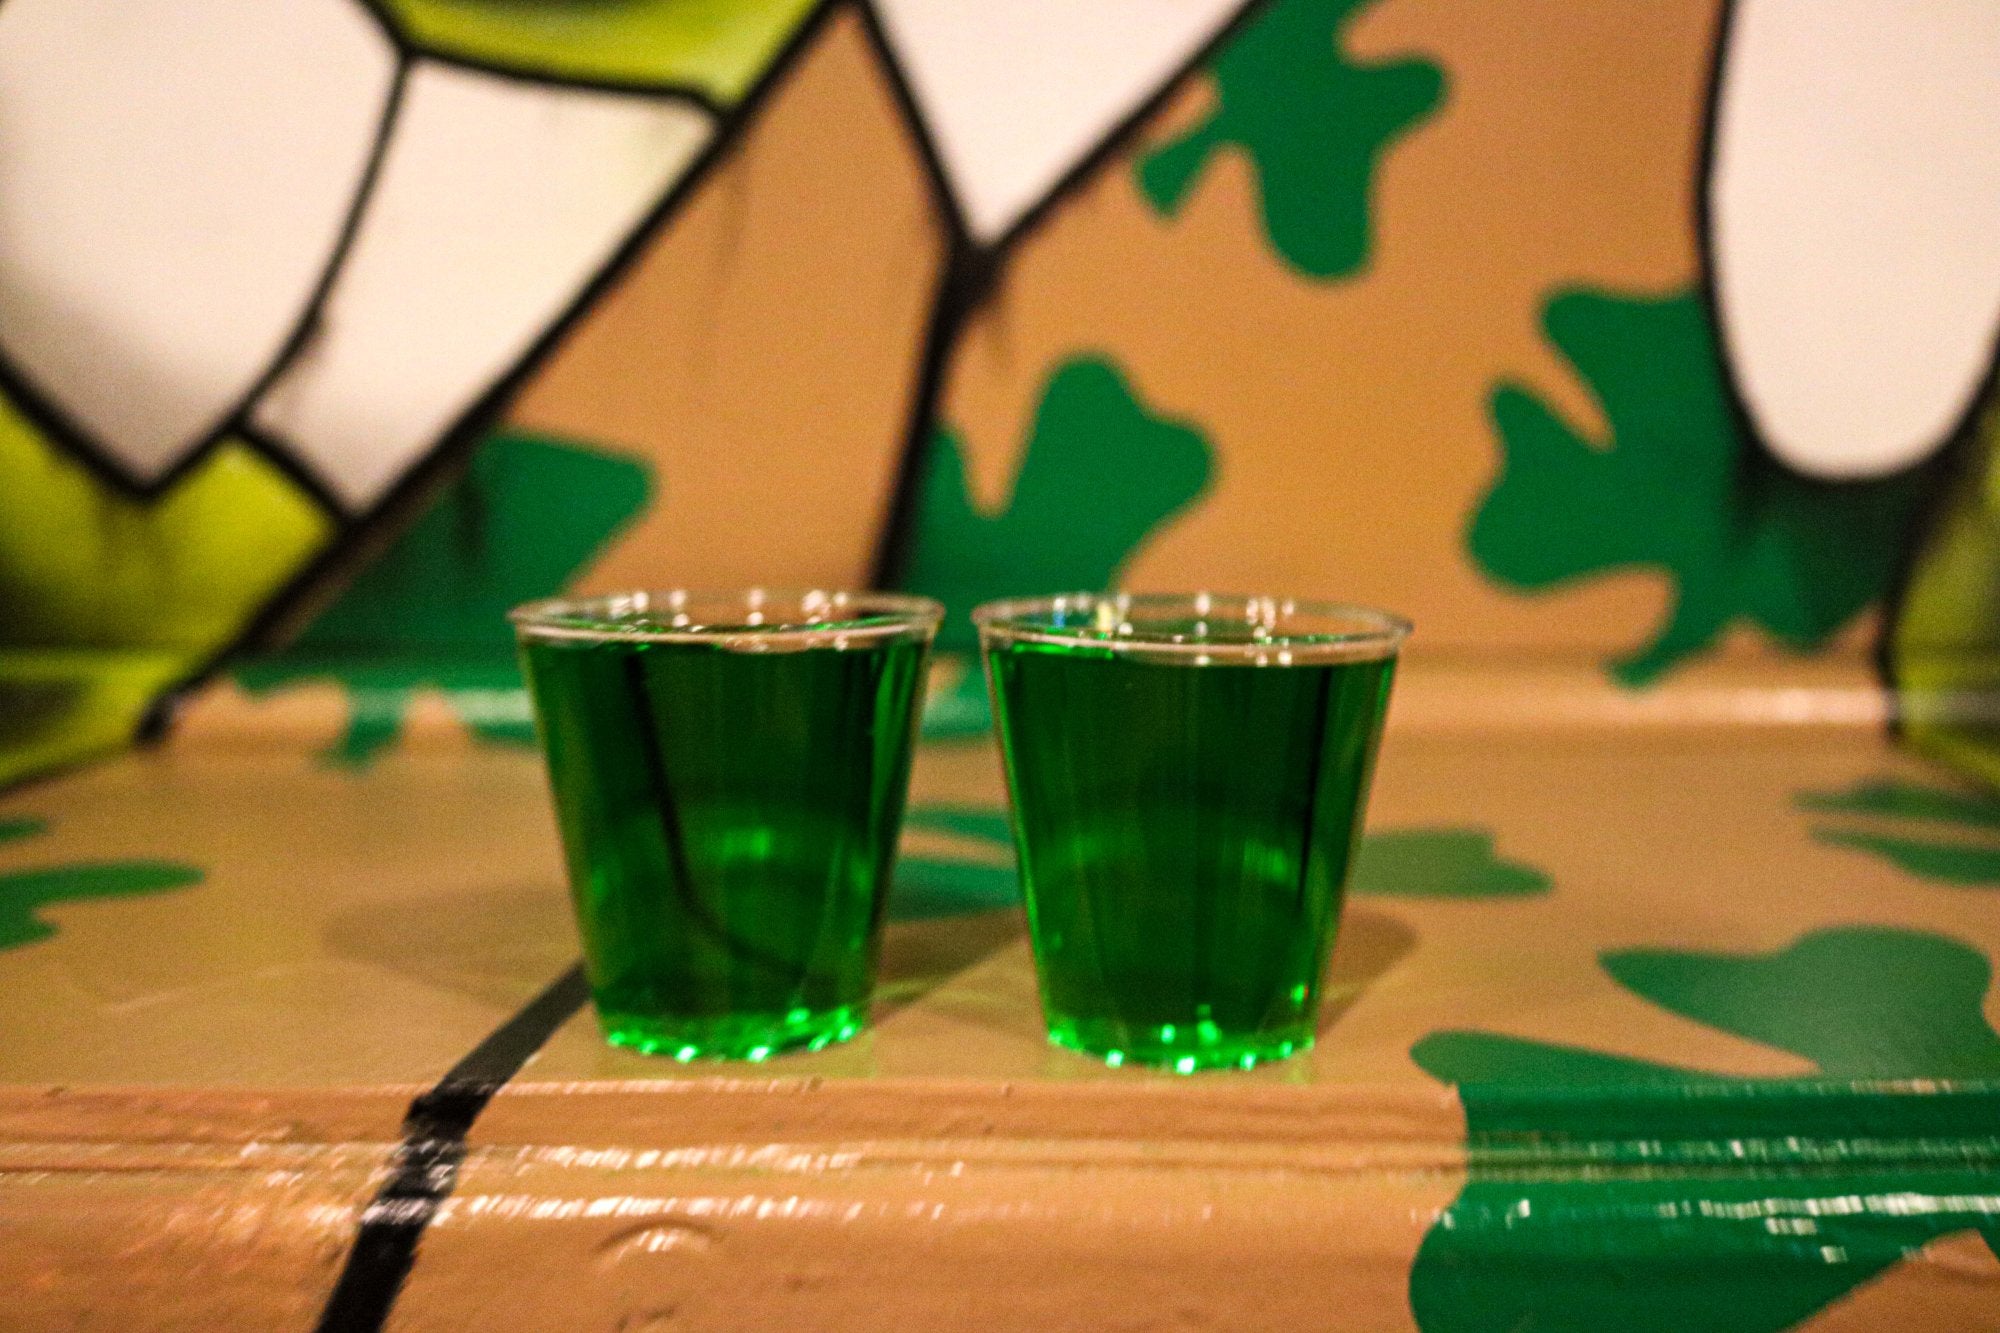 Sully's Tap - Bleed Green shots